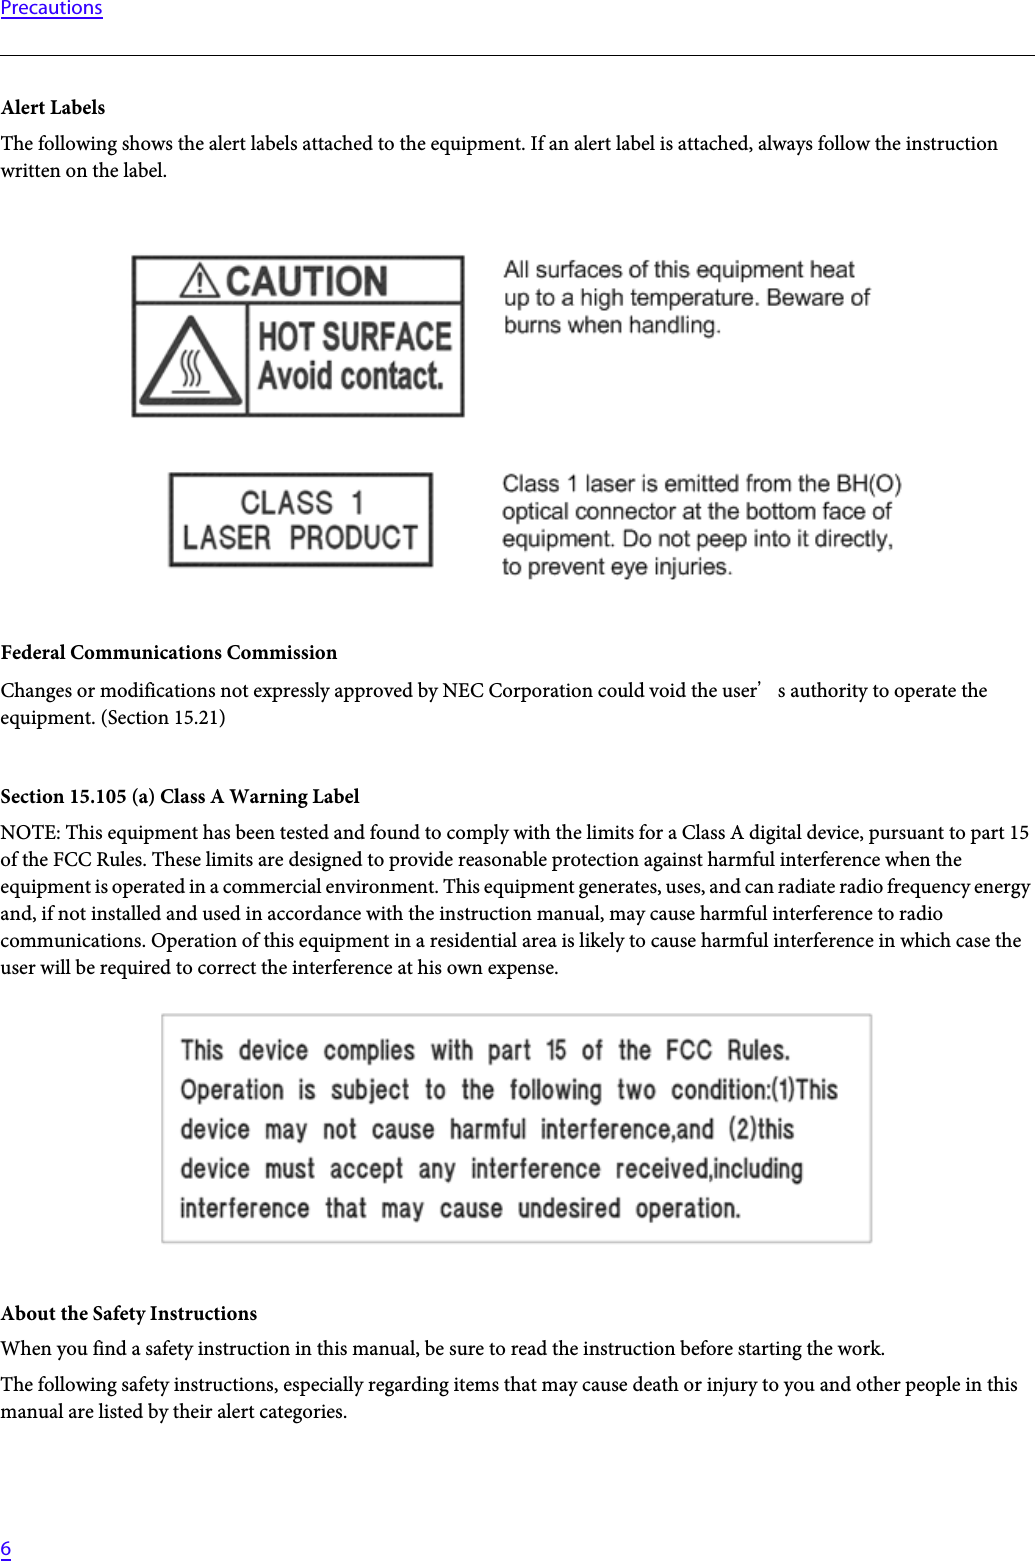   6PrecautionsAlert LabelsThe following shows the alert labels attached to the equipment. If an alert label is attached, always follow the instruction written on the label.Federal Communications CommissionChanges or modifications not expressly approved by NEC Corporation could void the users authority to operate the equipment. (Section 15.21)Section 15.105 (a) Class A Warning LabelNOTE: This equipment has been tested and found to comply with the limits for a Class A digital device, pursuant to part 15 of the FCC Rules. These limits are designed to provide reasonable protection against harmful interference when the equipment is operated in a commercial environment. This equipment generates, uses, and can radiate radio frequency energy and, if not installed and used in accordance with the instruction manual, may cause harmful interference to radio communications. Operation of this equipment in a residential area is likely to cause harmful interference in which case the user will be required to correct the interference at his own expense.About the Safety InstructionsWhen you find a safety instruction in this manual, be sure to read the instruction before starting the work.The following safety instructions, especially regarding items that may cause death or injury to you and other people in this manual are listed by their alert categories.